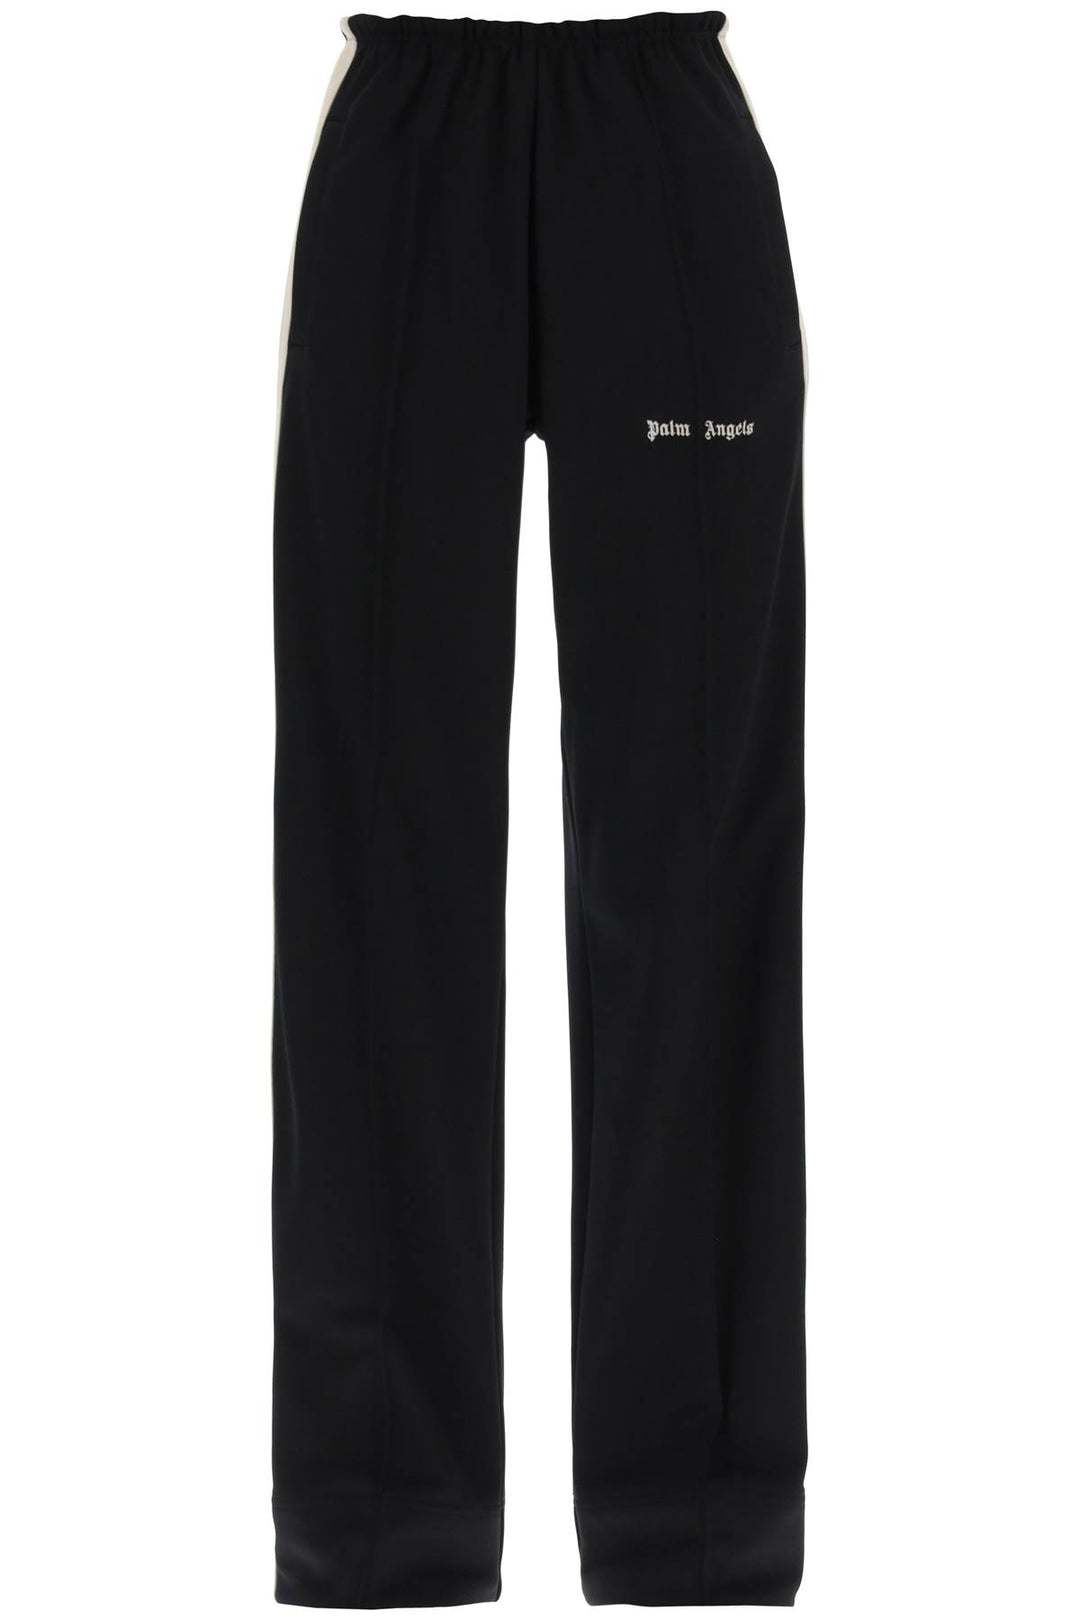 Palm angels track pants with contrast bands-0